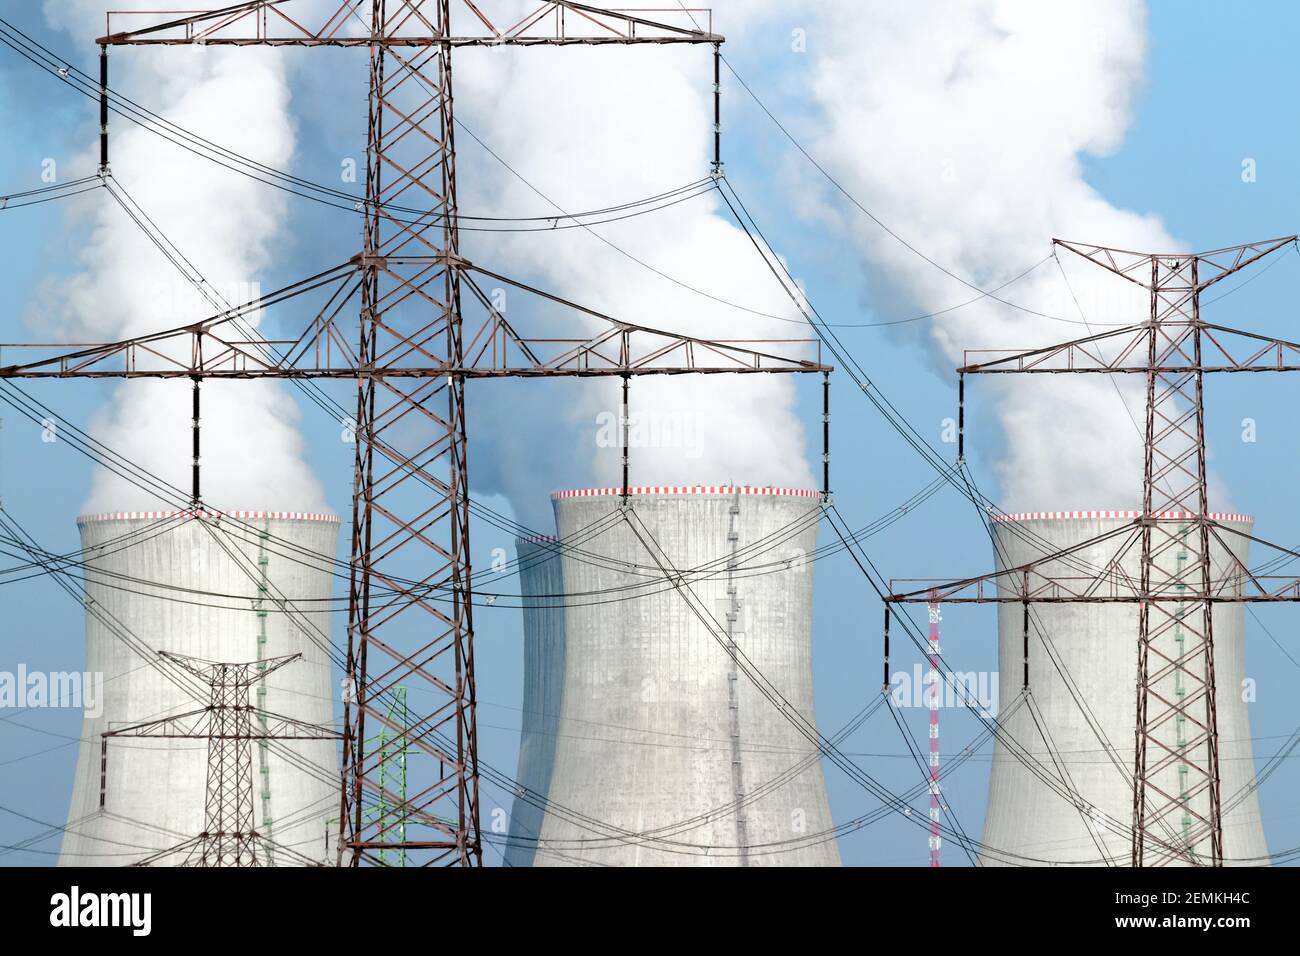 Power lines in front of cooling towers Stock Photo